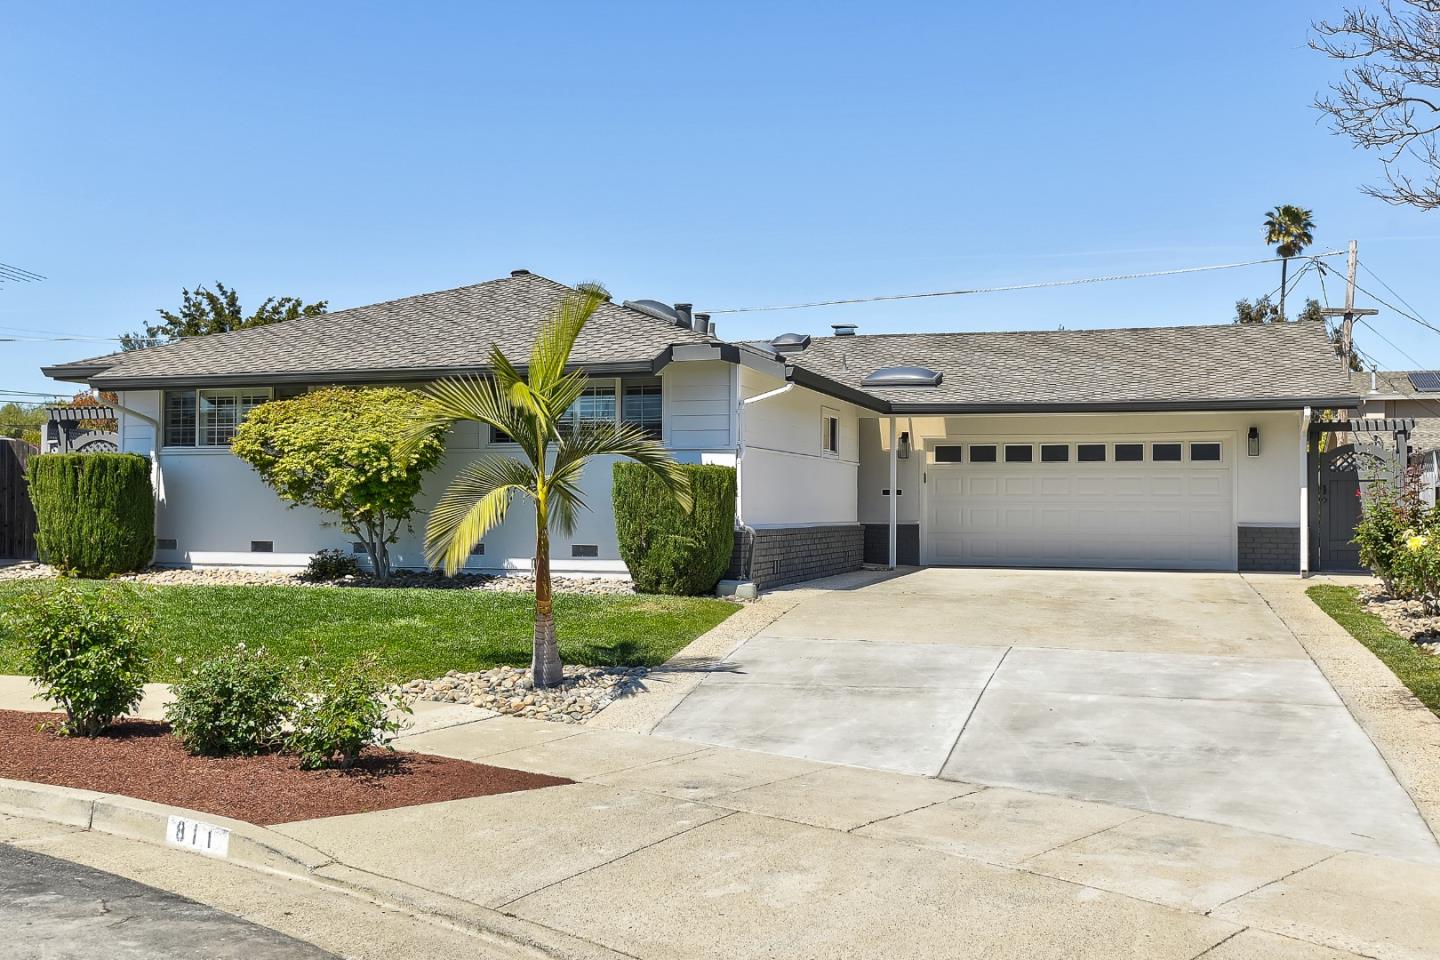 Photo of 811 Kirkaldy Ct in Sunnyvale, CA